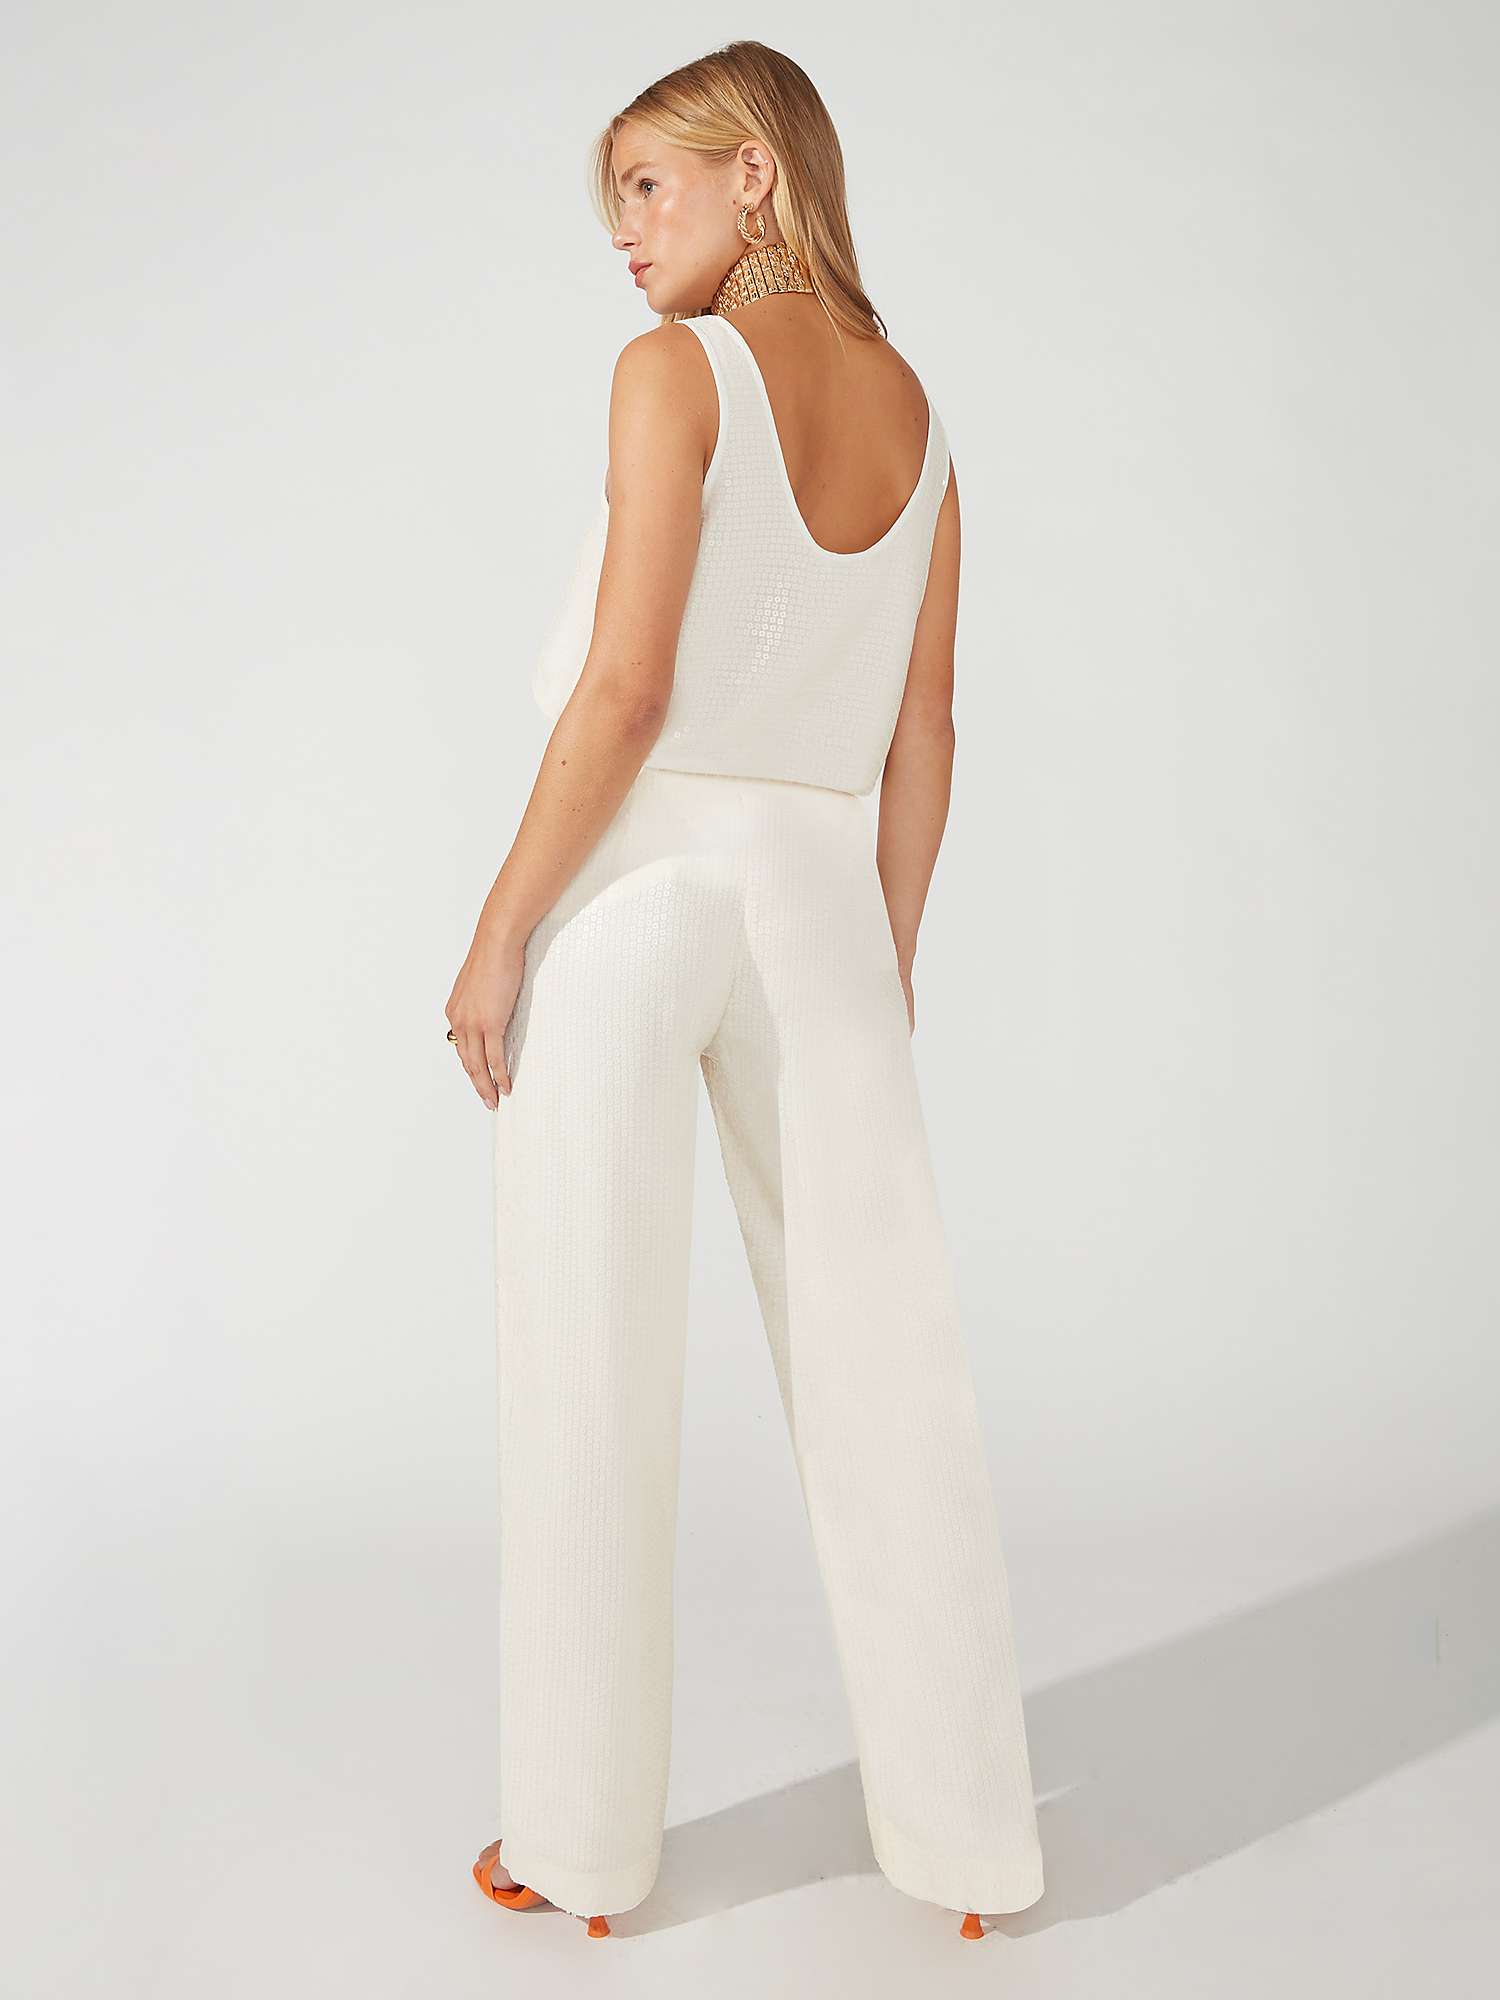 Buy Ro&Zo Sequin Trousers, Ivory Online at johnlewis.com